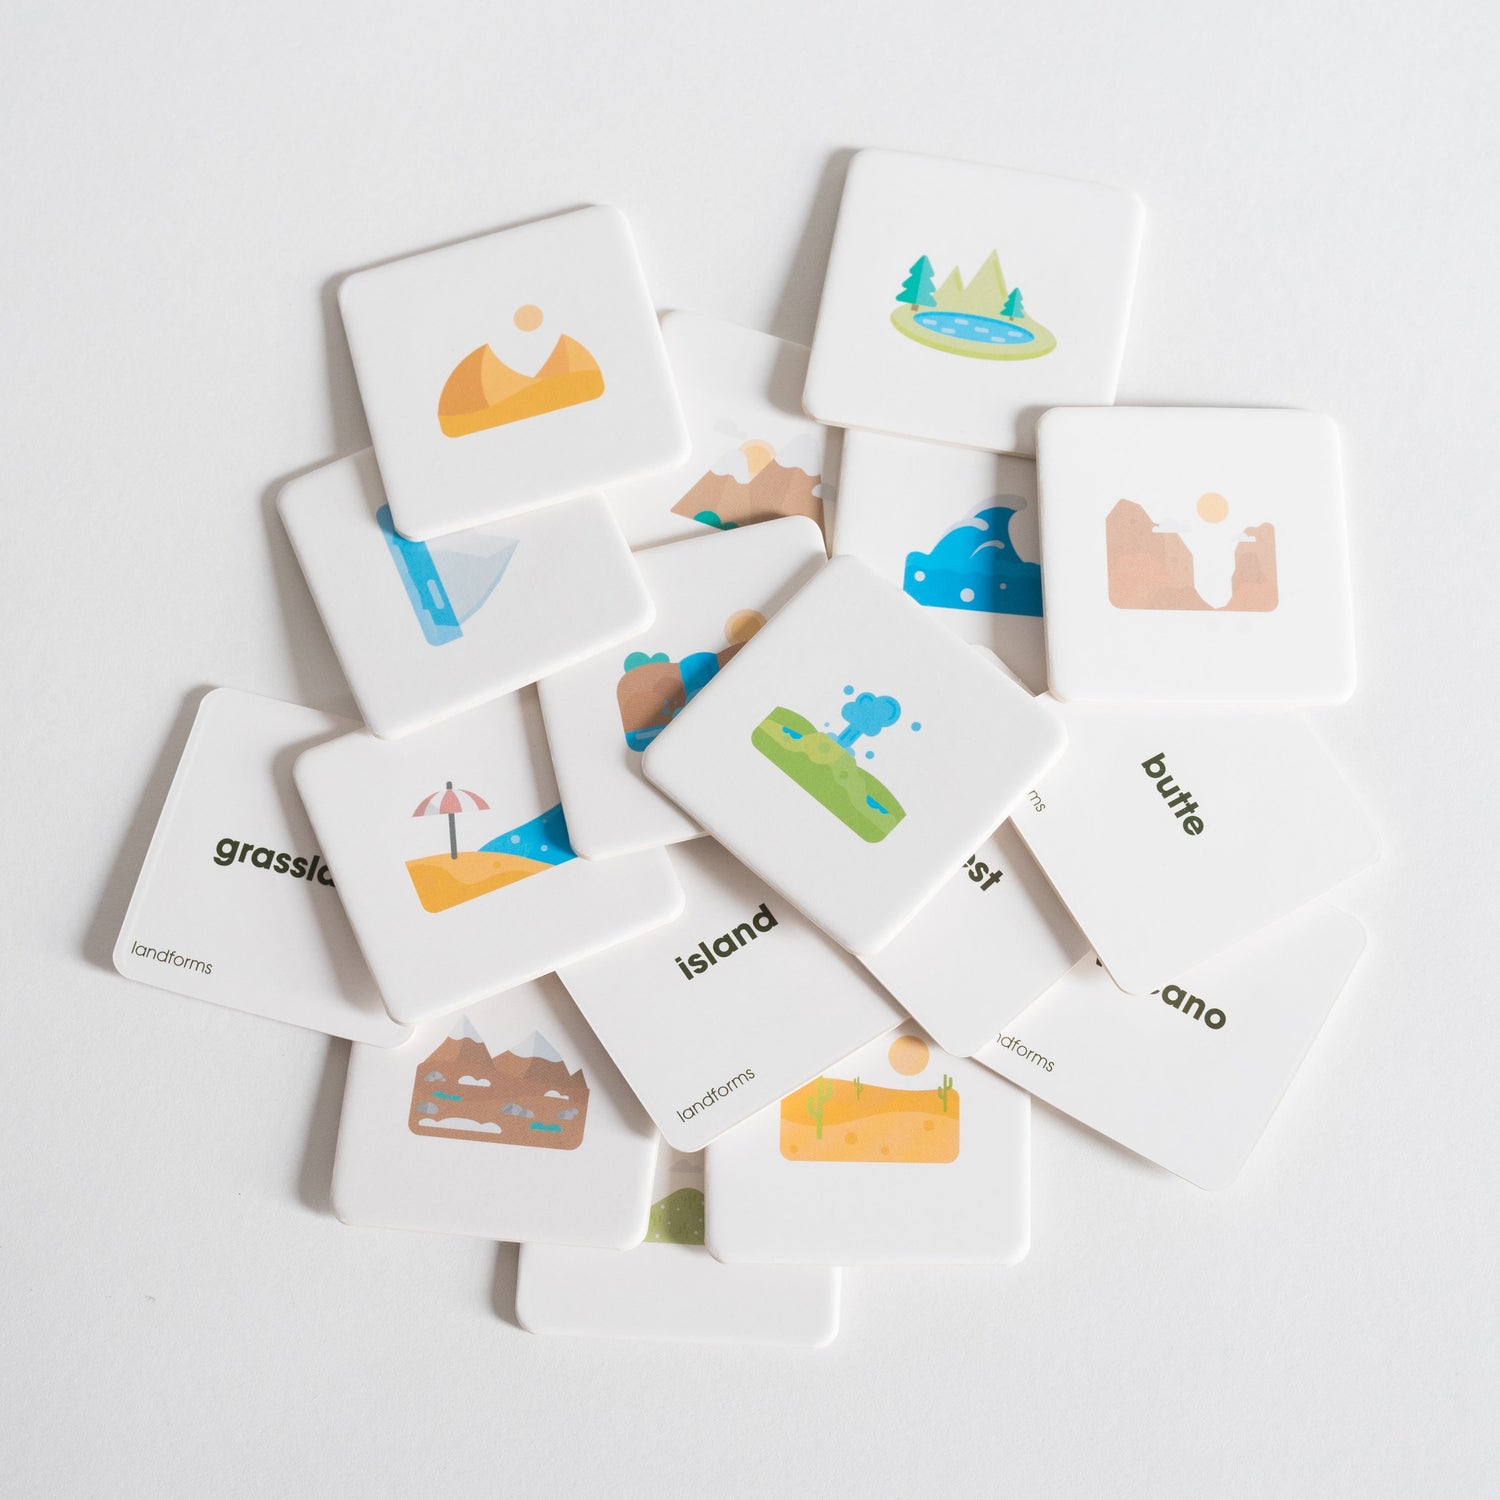 Landforms Pack tiles arranged loosely in a pile on white background